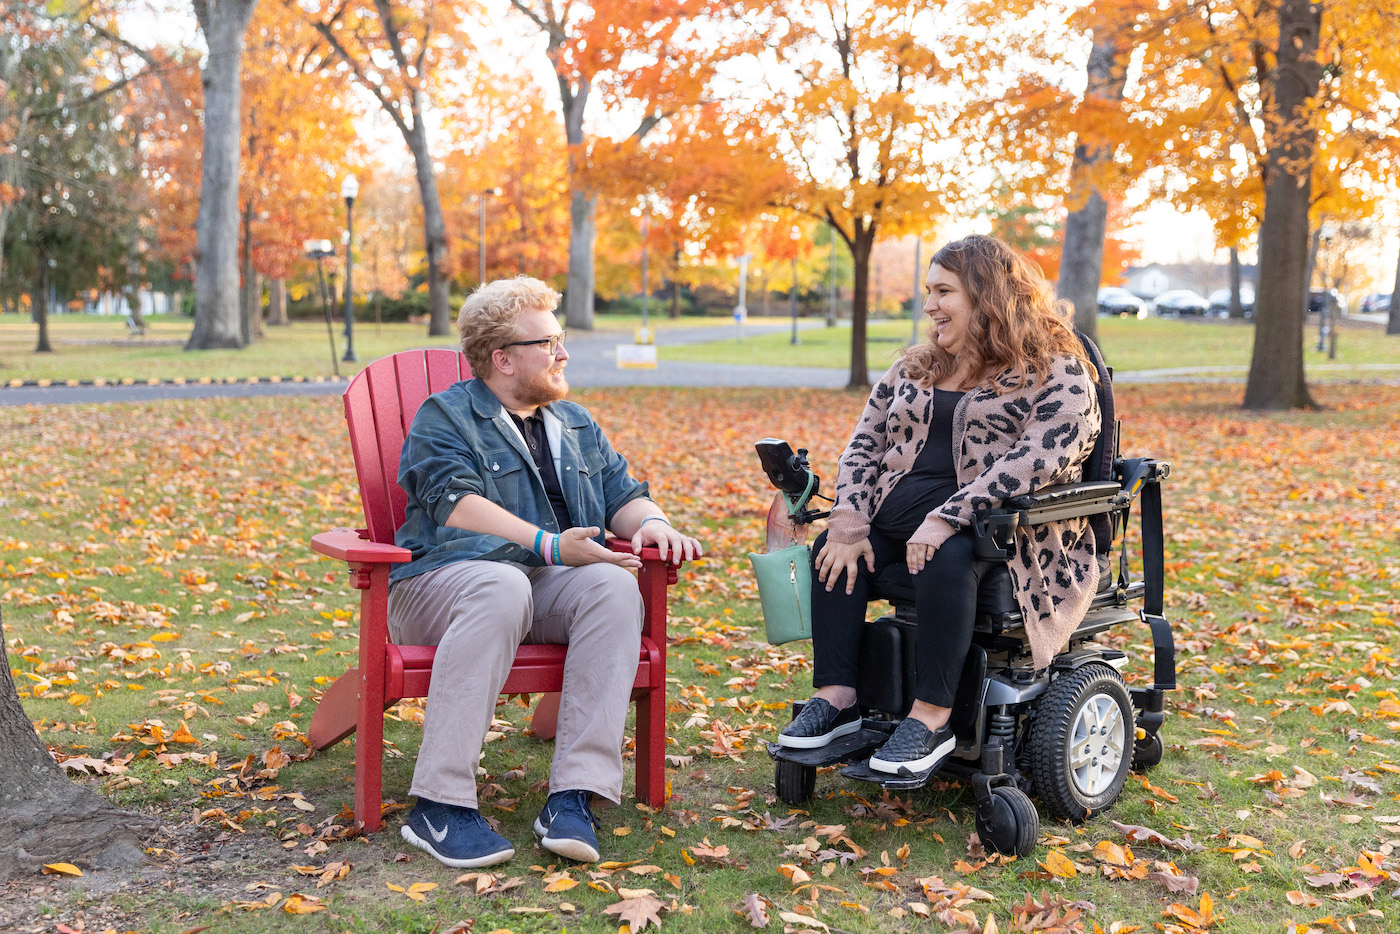 Two Rowan University students smile at each other while socializing, one student in a chair and the other in a wheelchair.